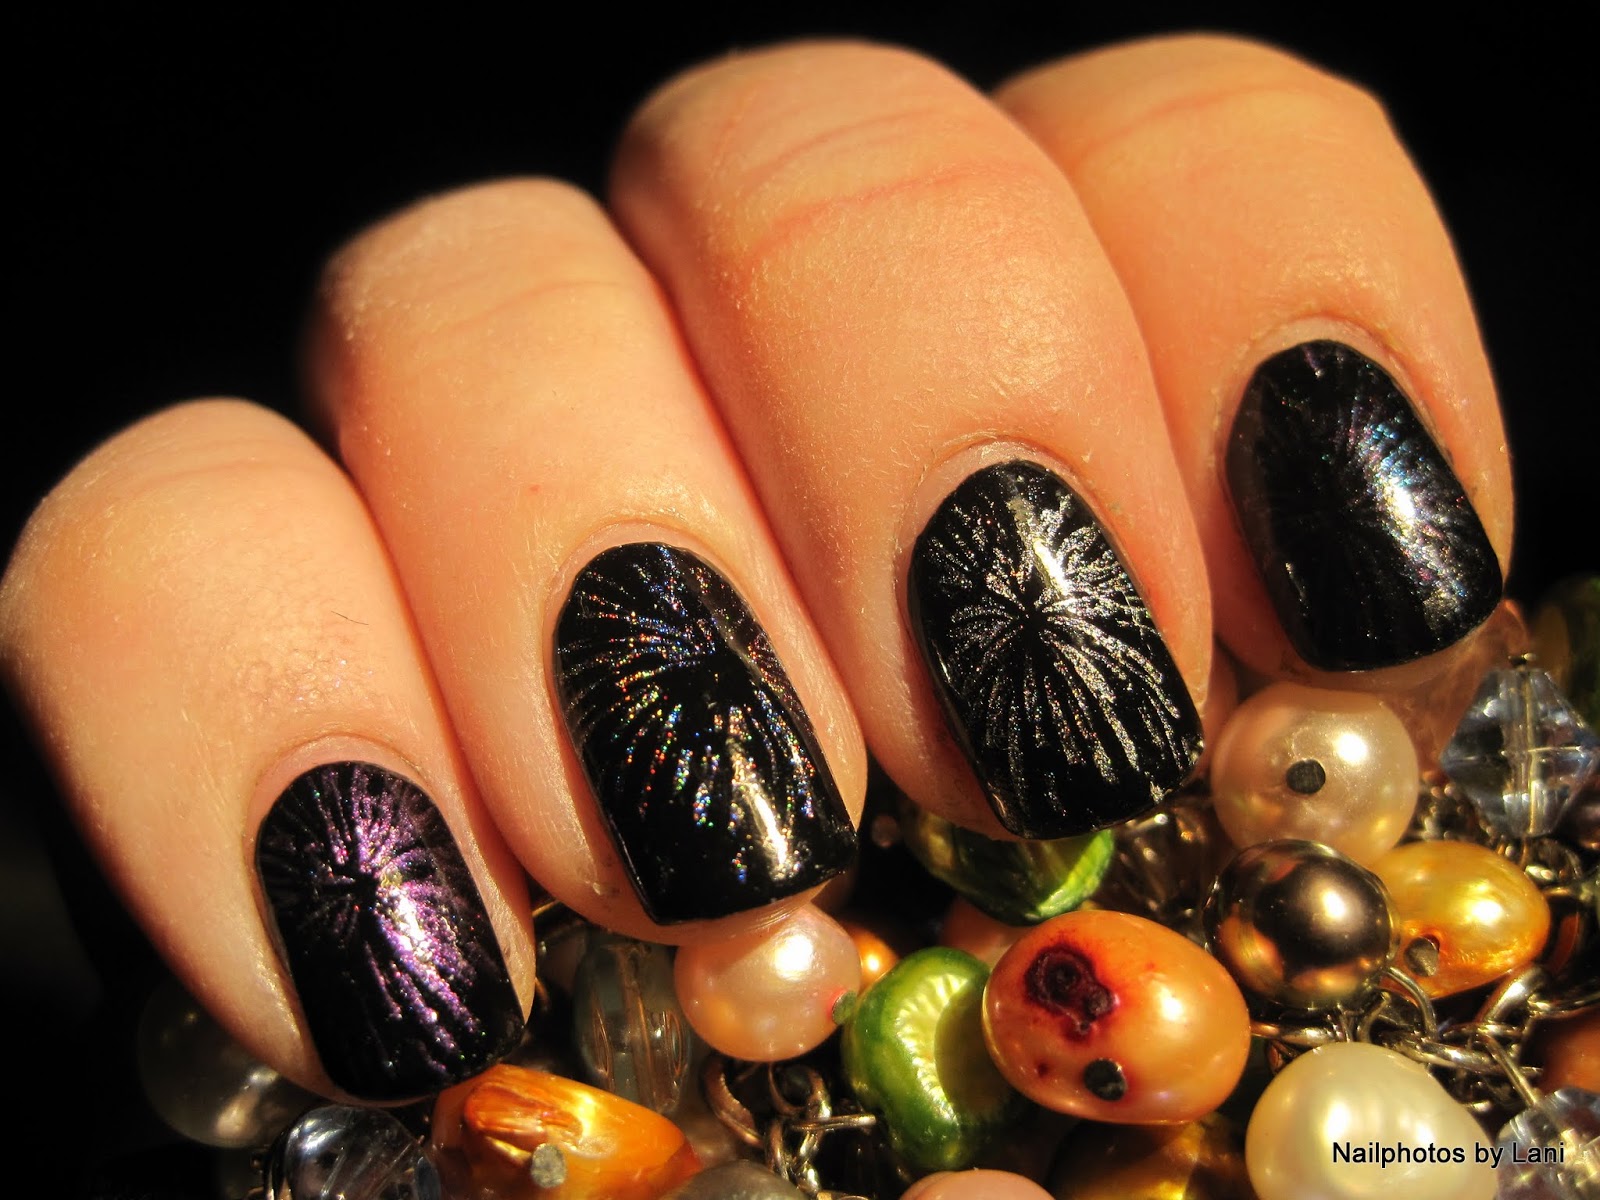 10. "New Year's Nail Art Ideas for Beginners on Tumblr" - wide 10